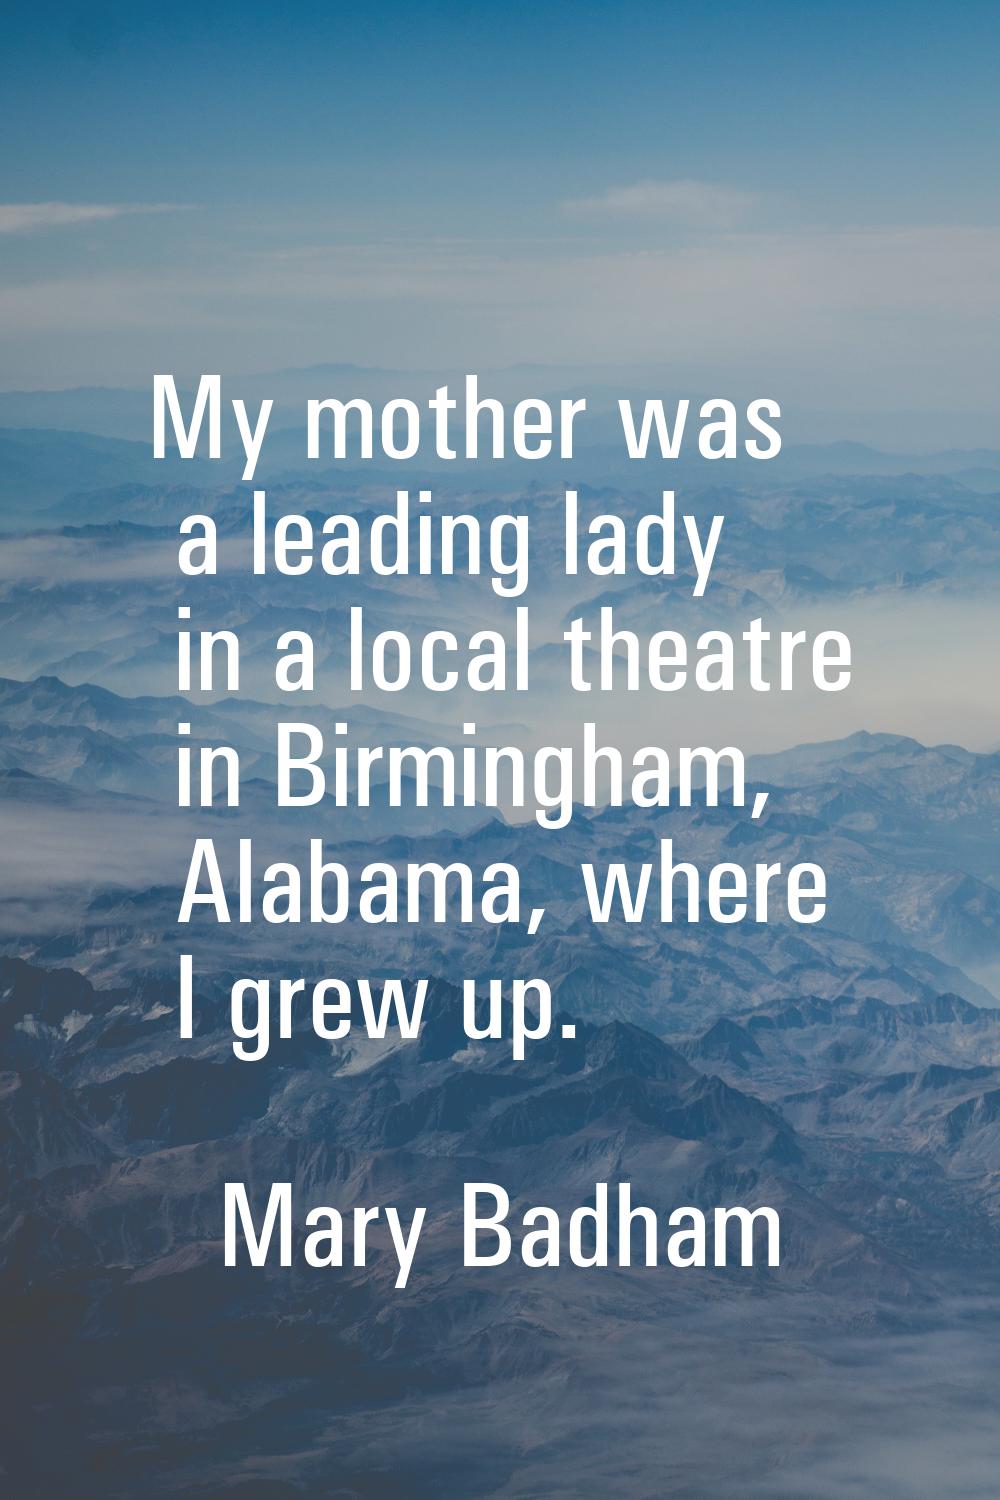 My mother was a leading lady in a local theatre in Birmingham, Alabama, where I grew up.